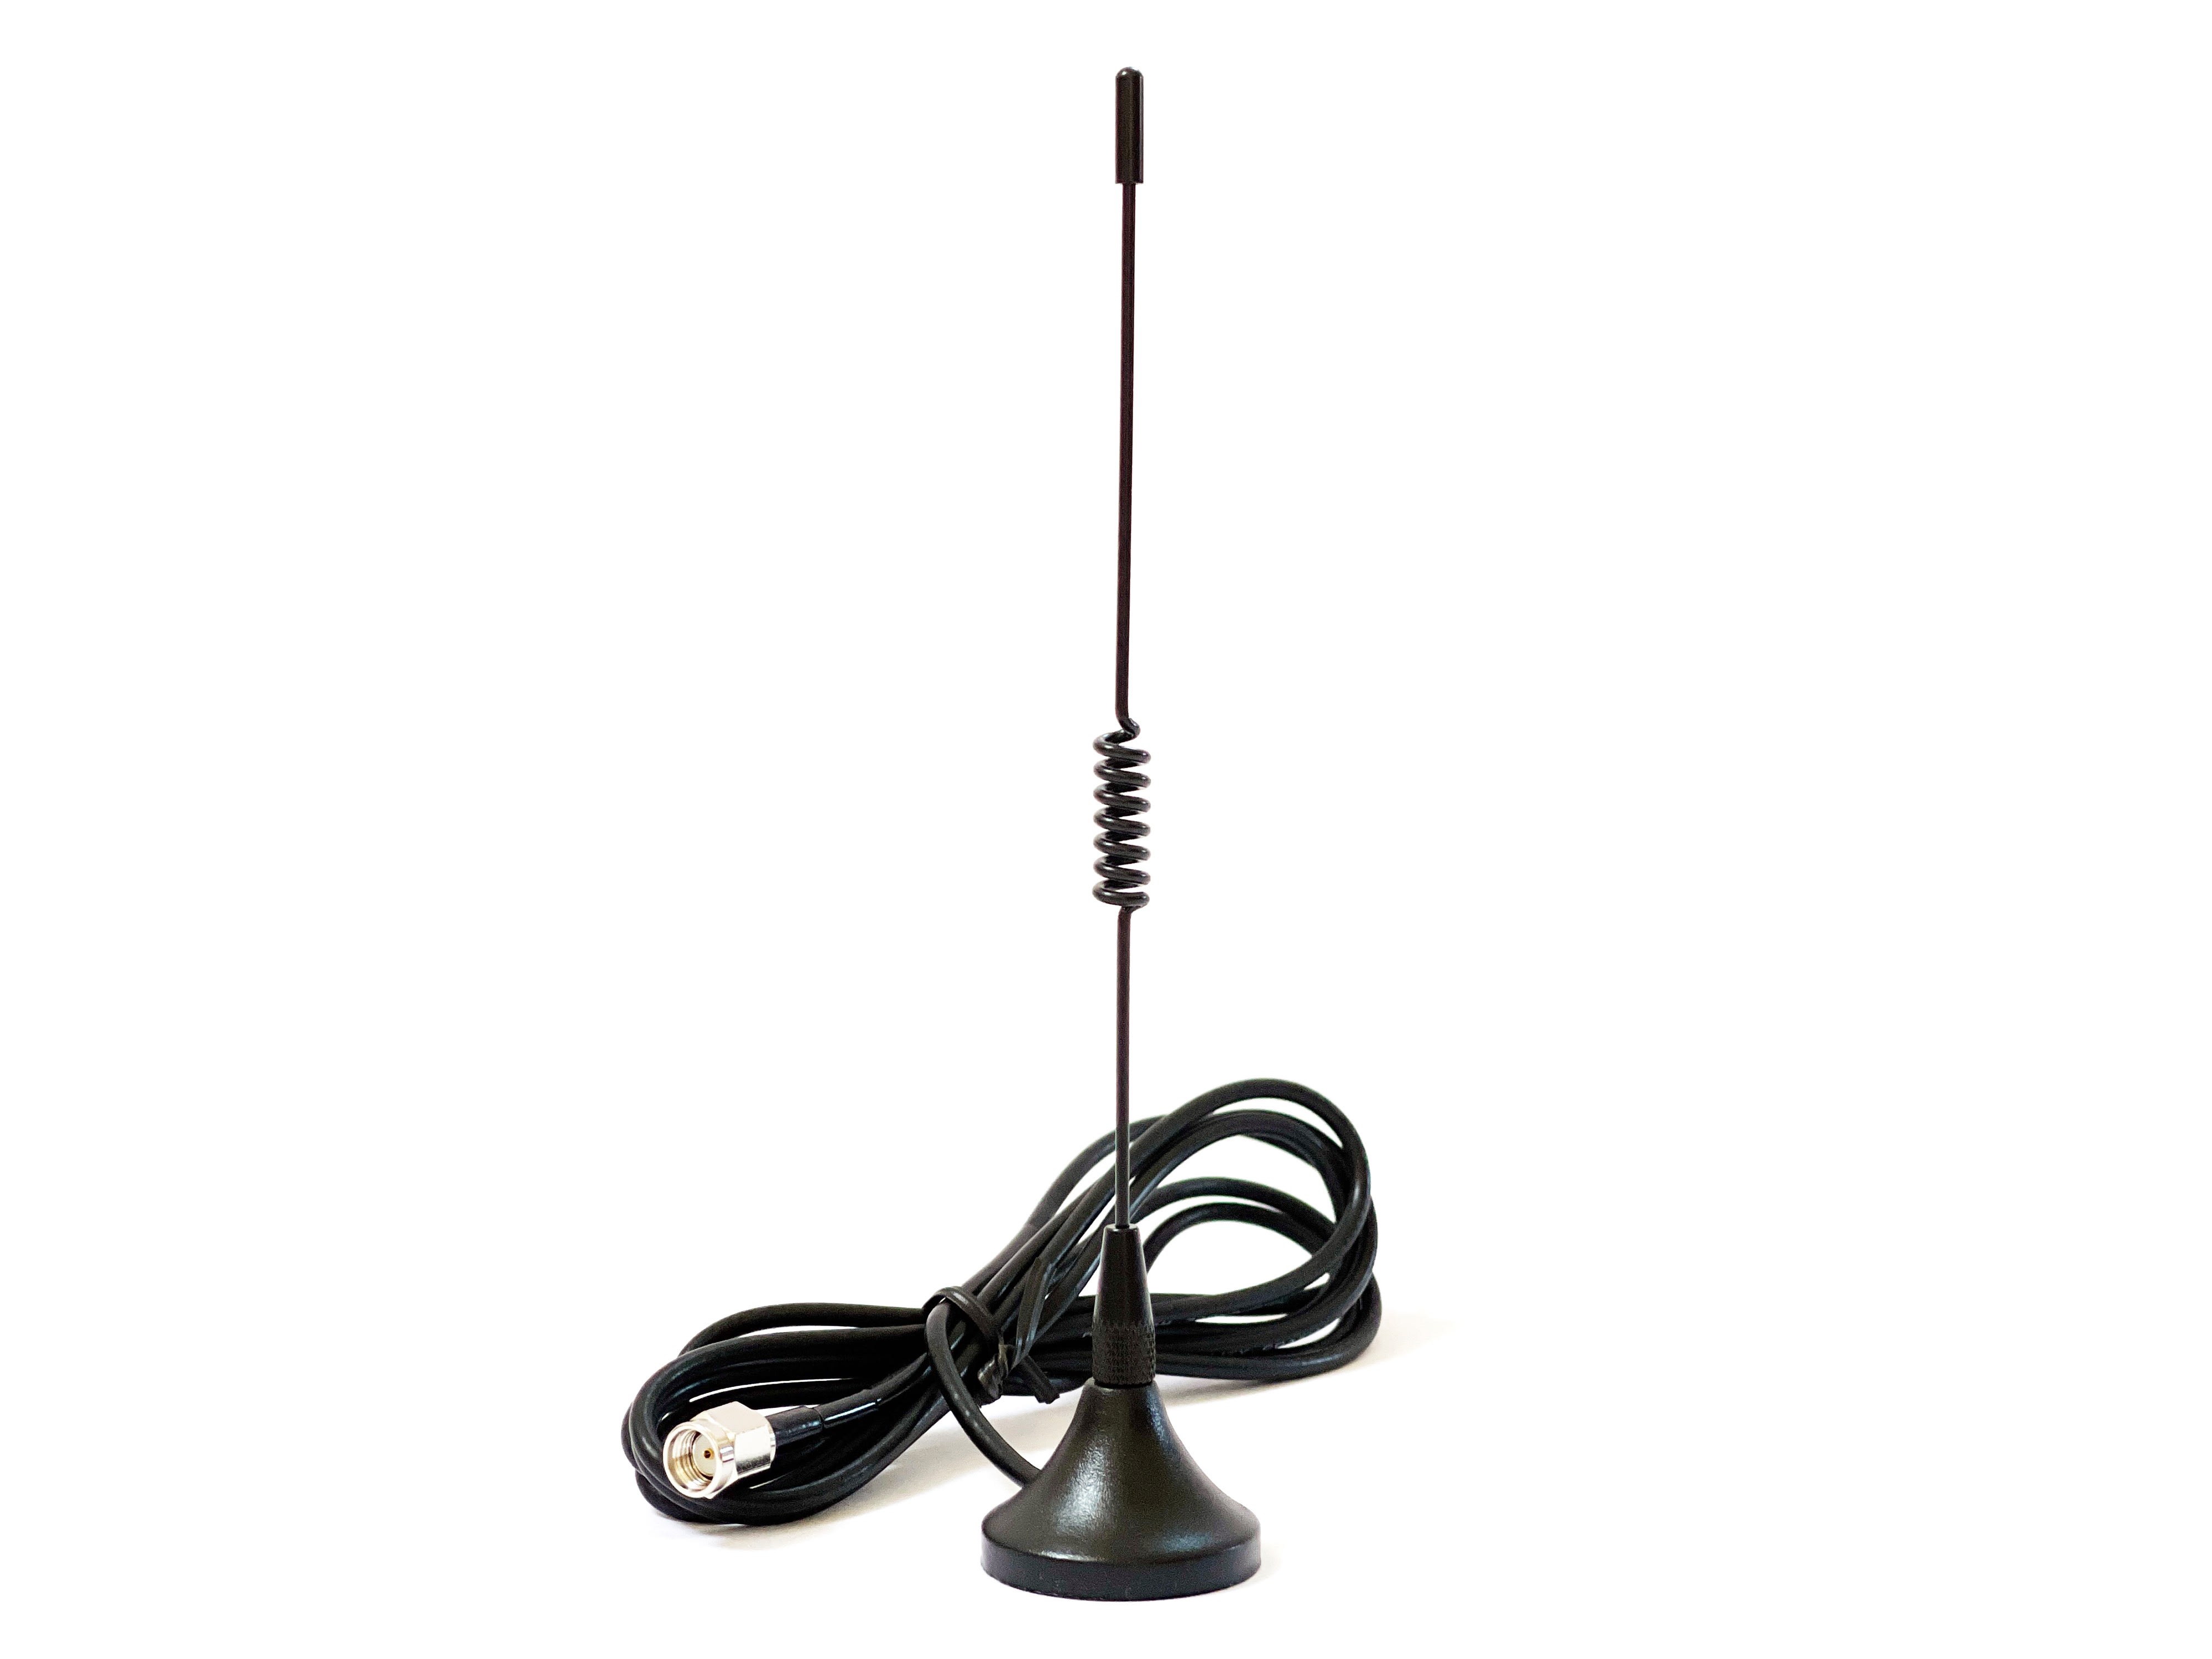 Acksys - Antenne magnetique 5 dBi + cable 1,2m